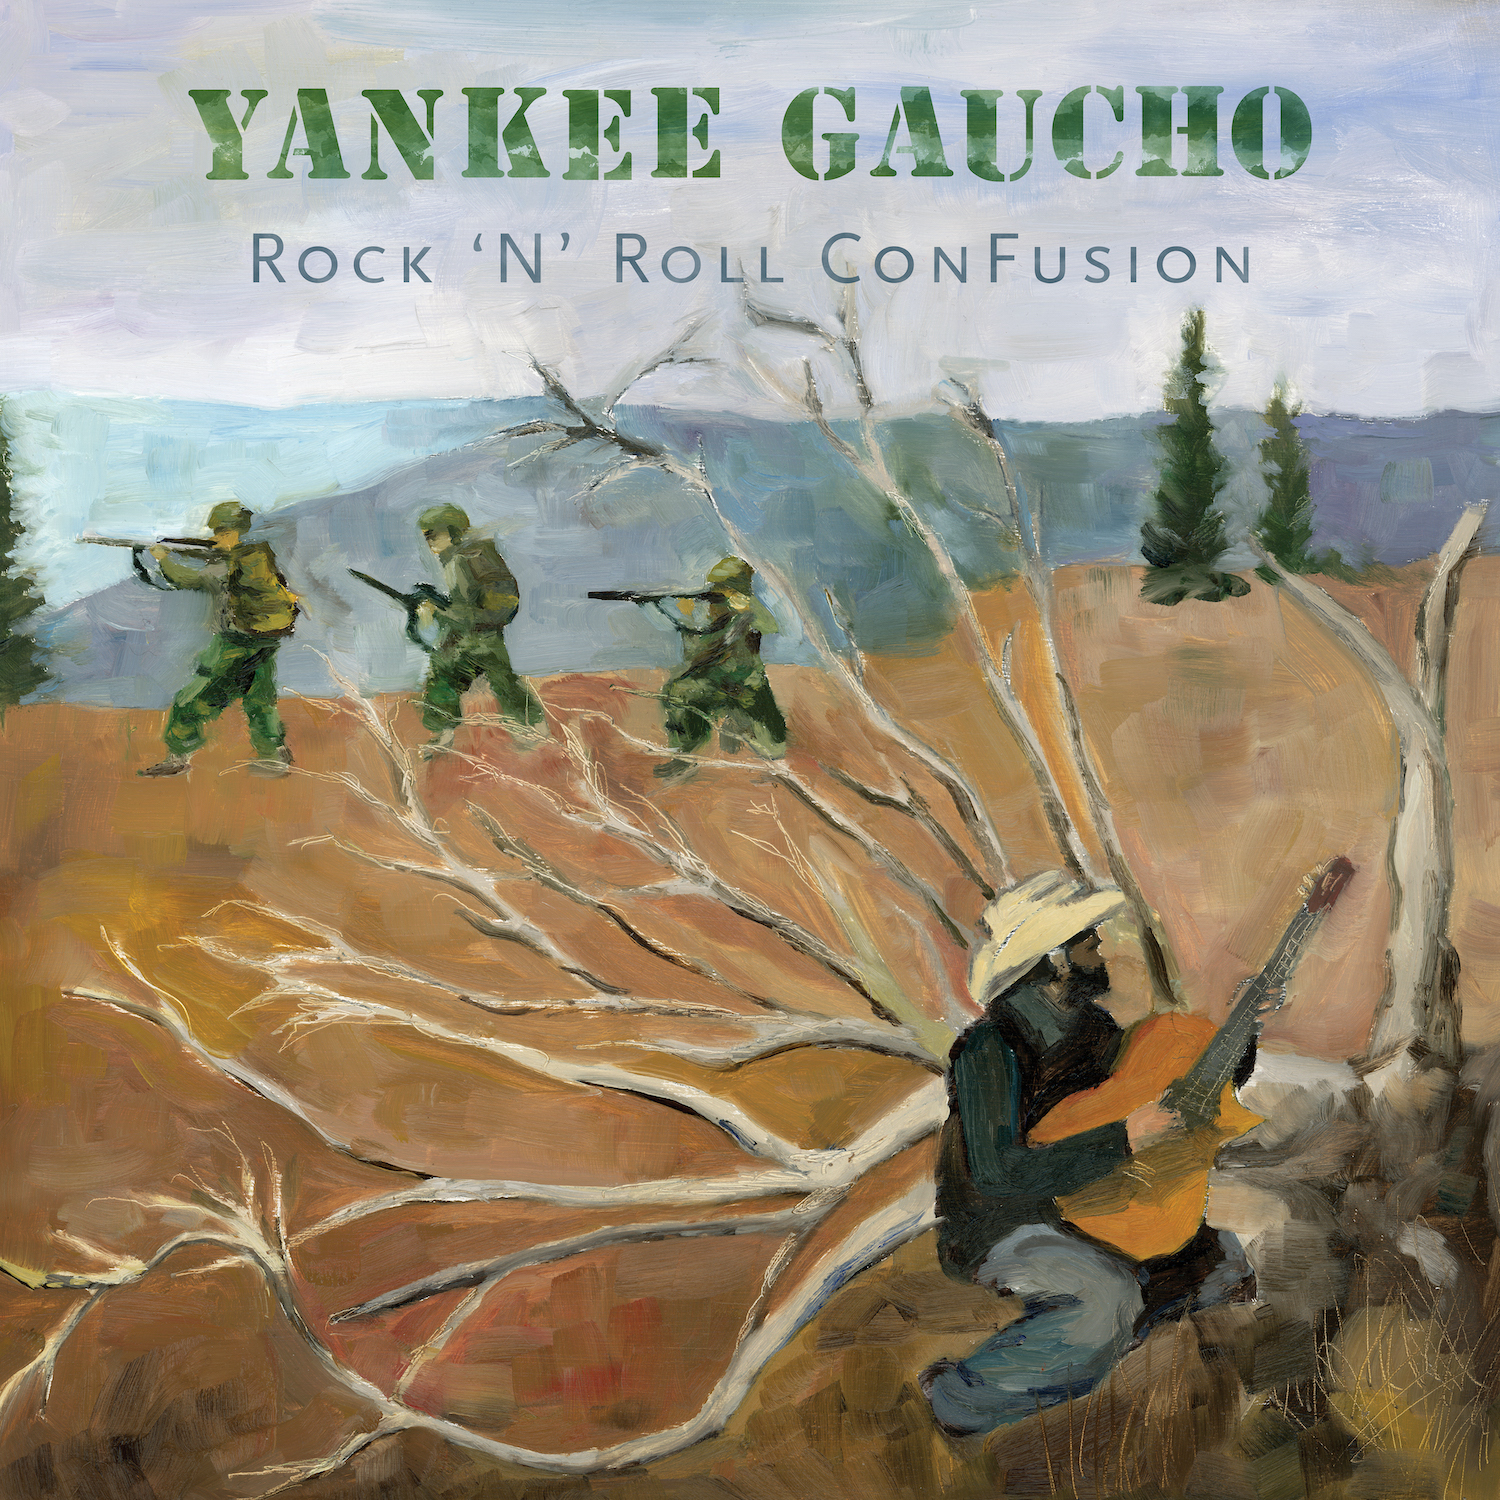 DEBUT ALBUM REVIEW: Rock ‘N’ Roll ConFusion by Yankee Gaucho